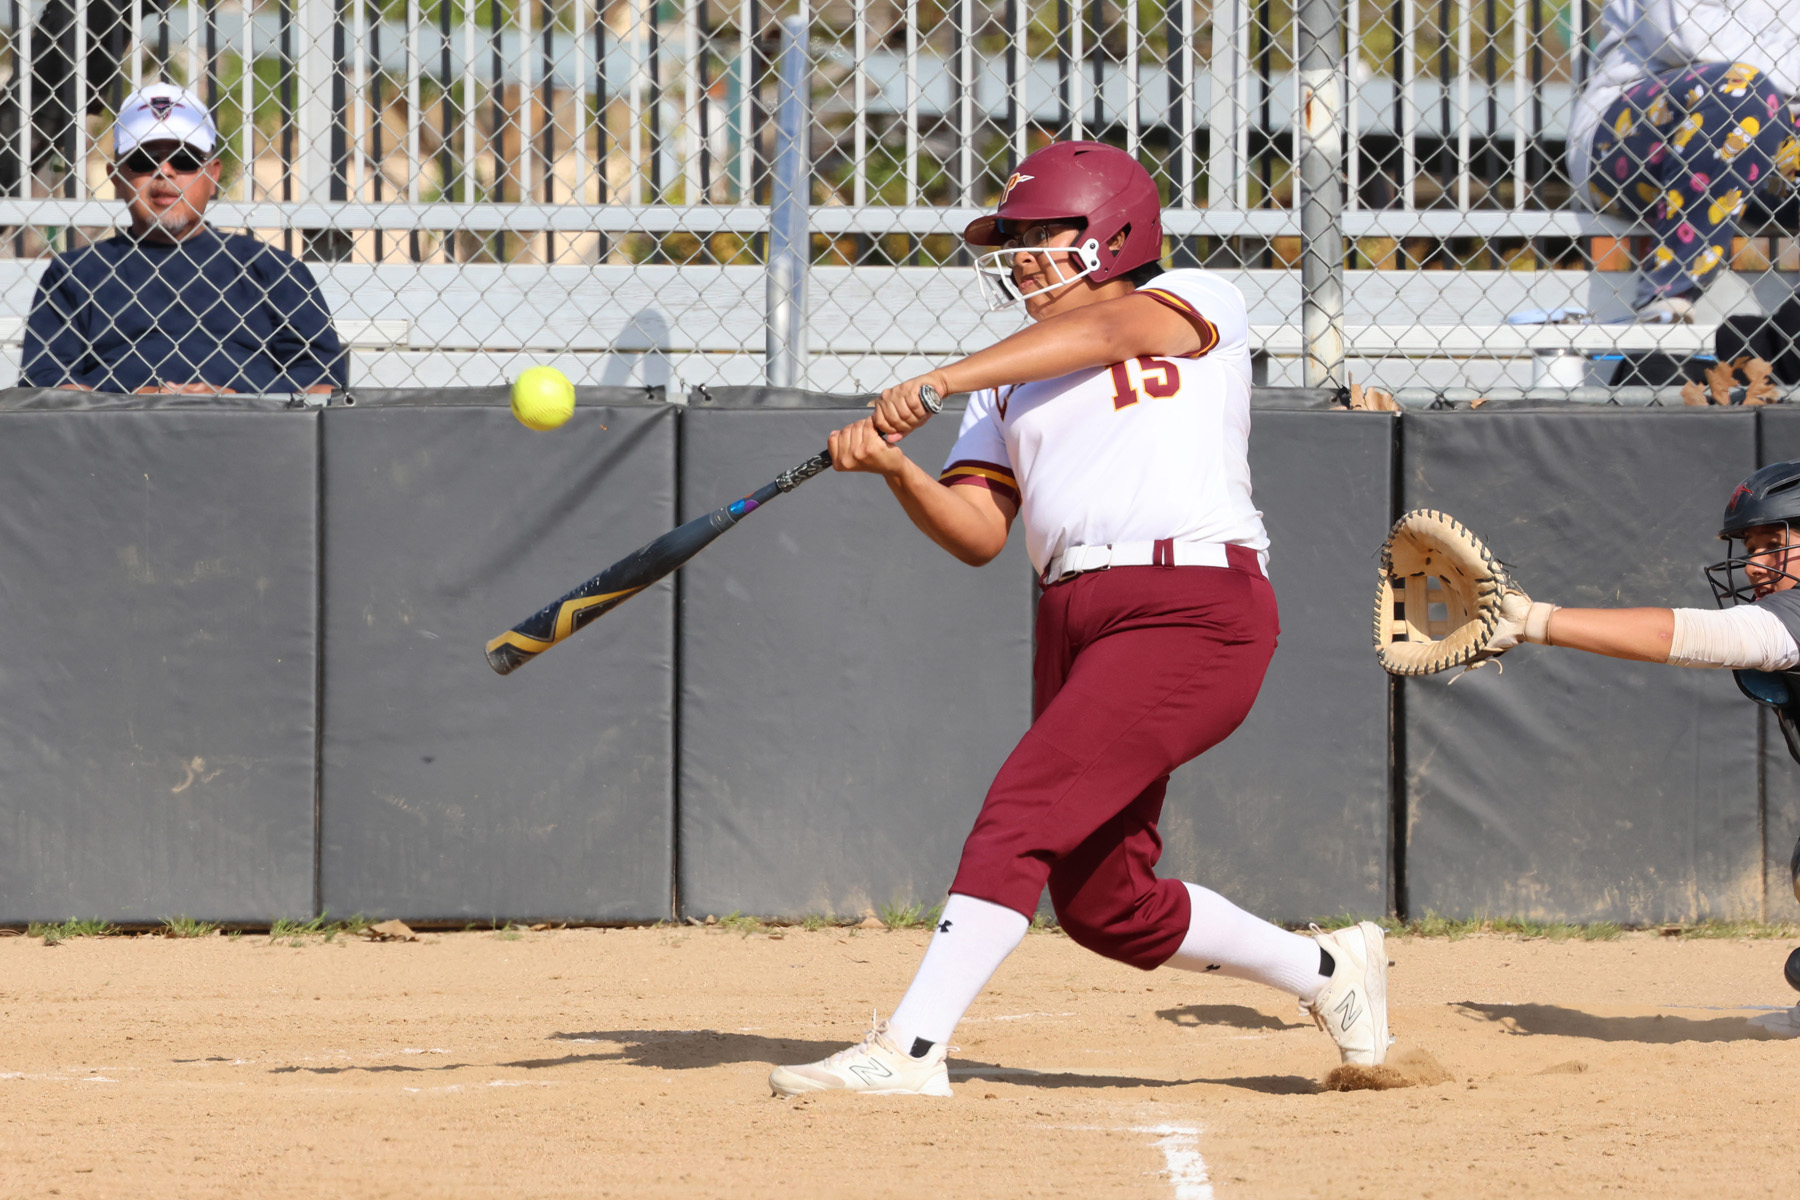 Alysa Rojas rips a hit during the Lancers win (photo by Richard Quinton).